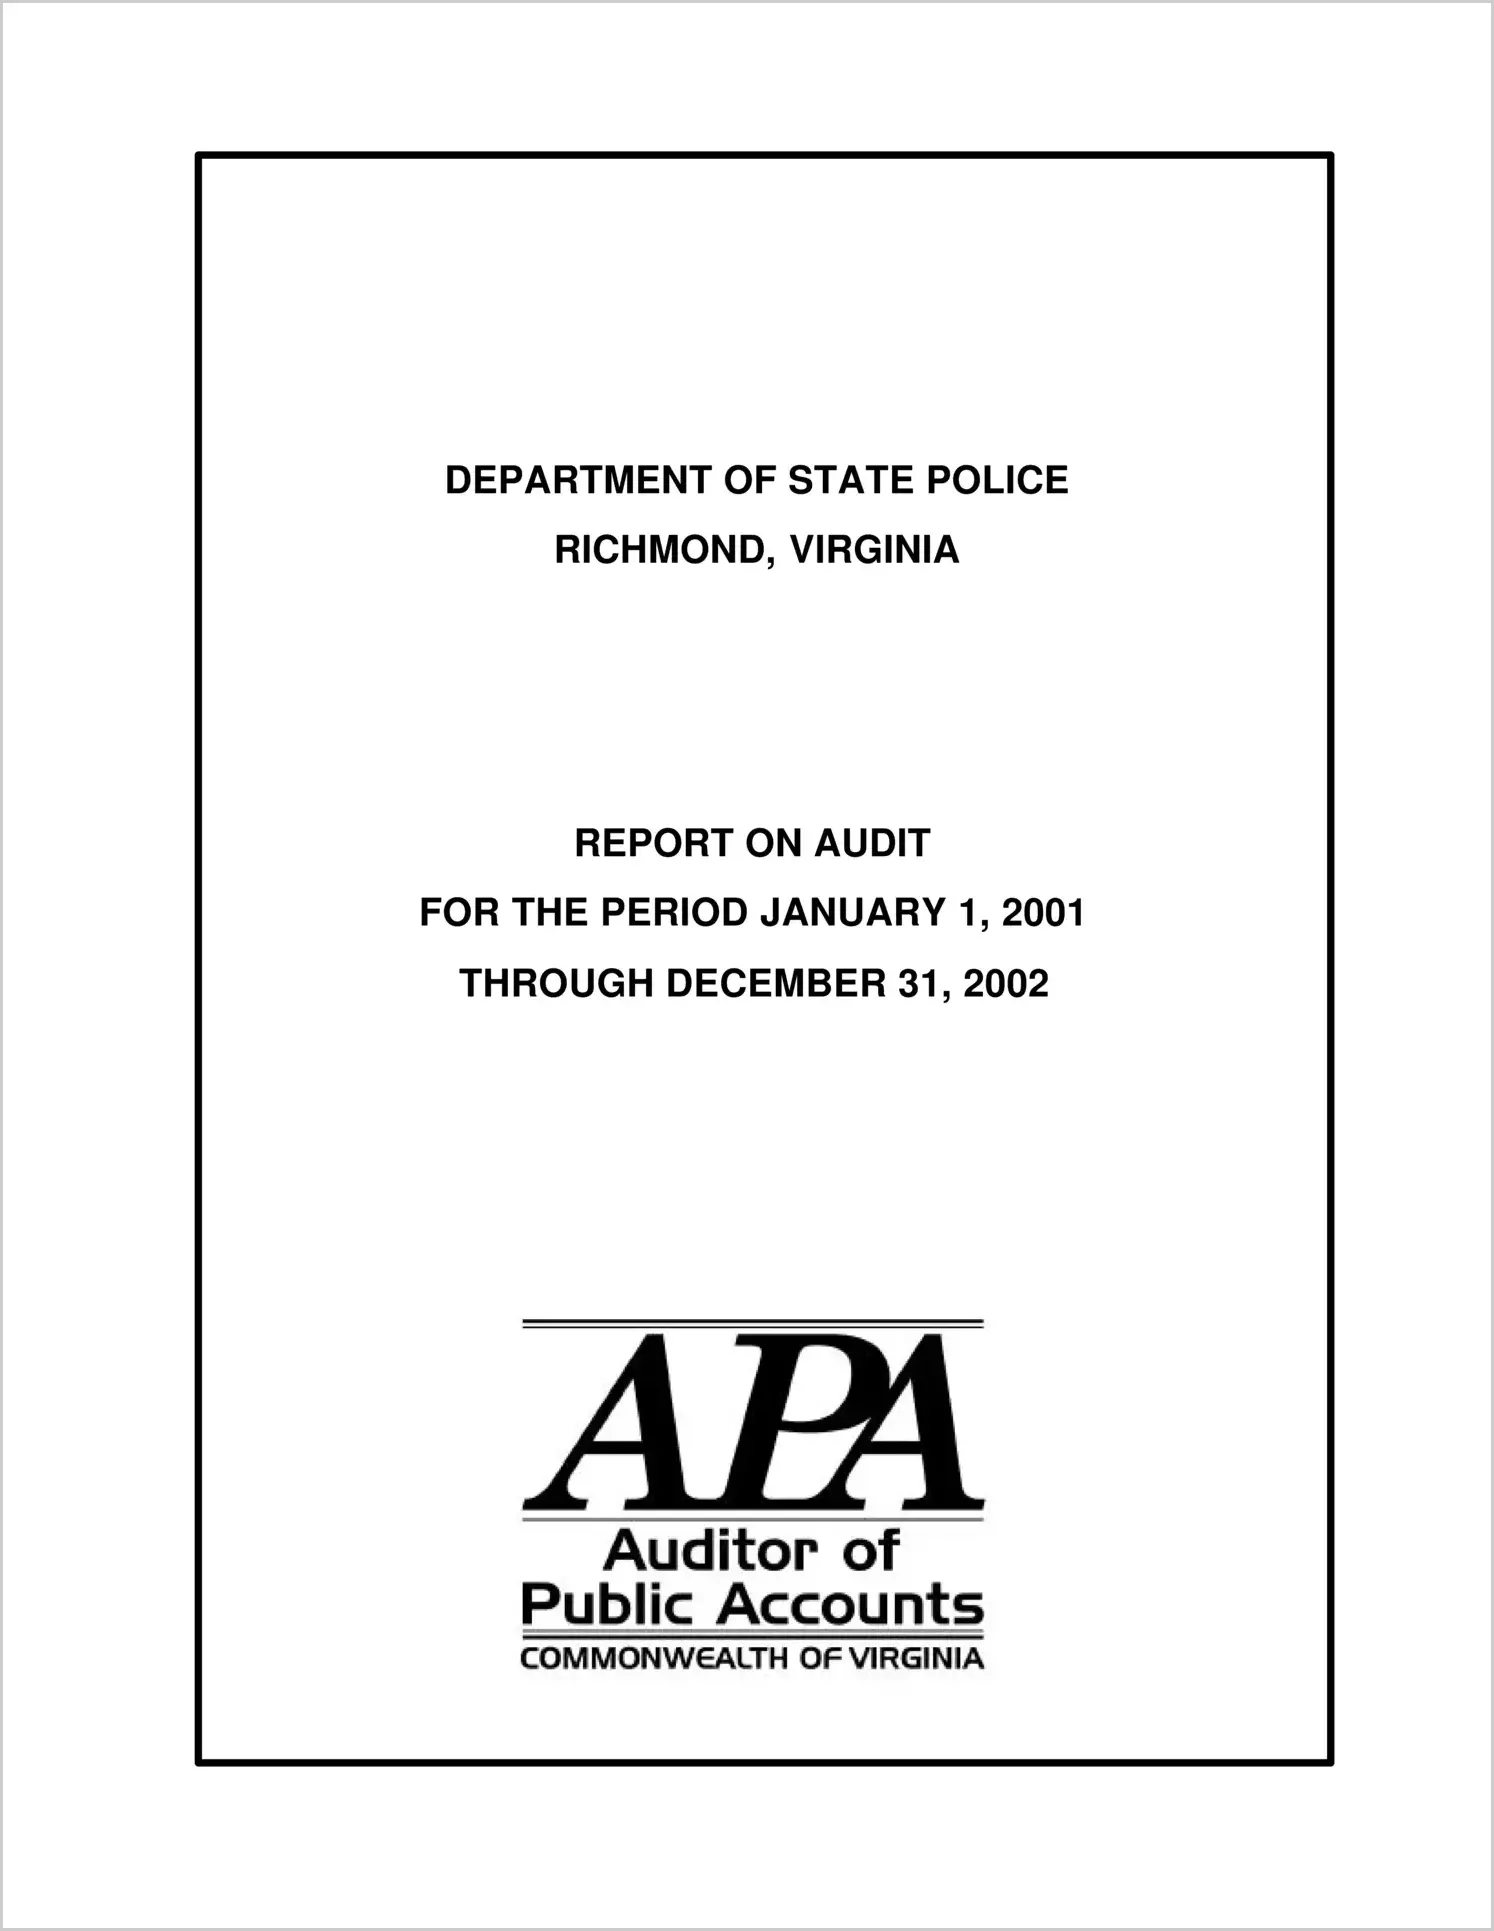 Department of State Police for the period January 1, 2001 through December 31, 2002